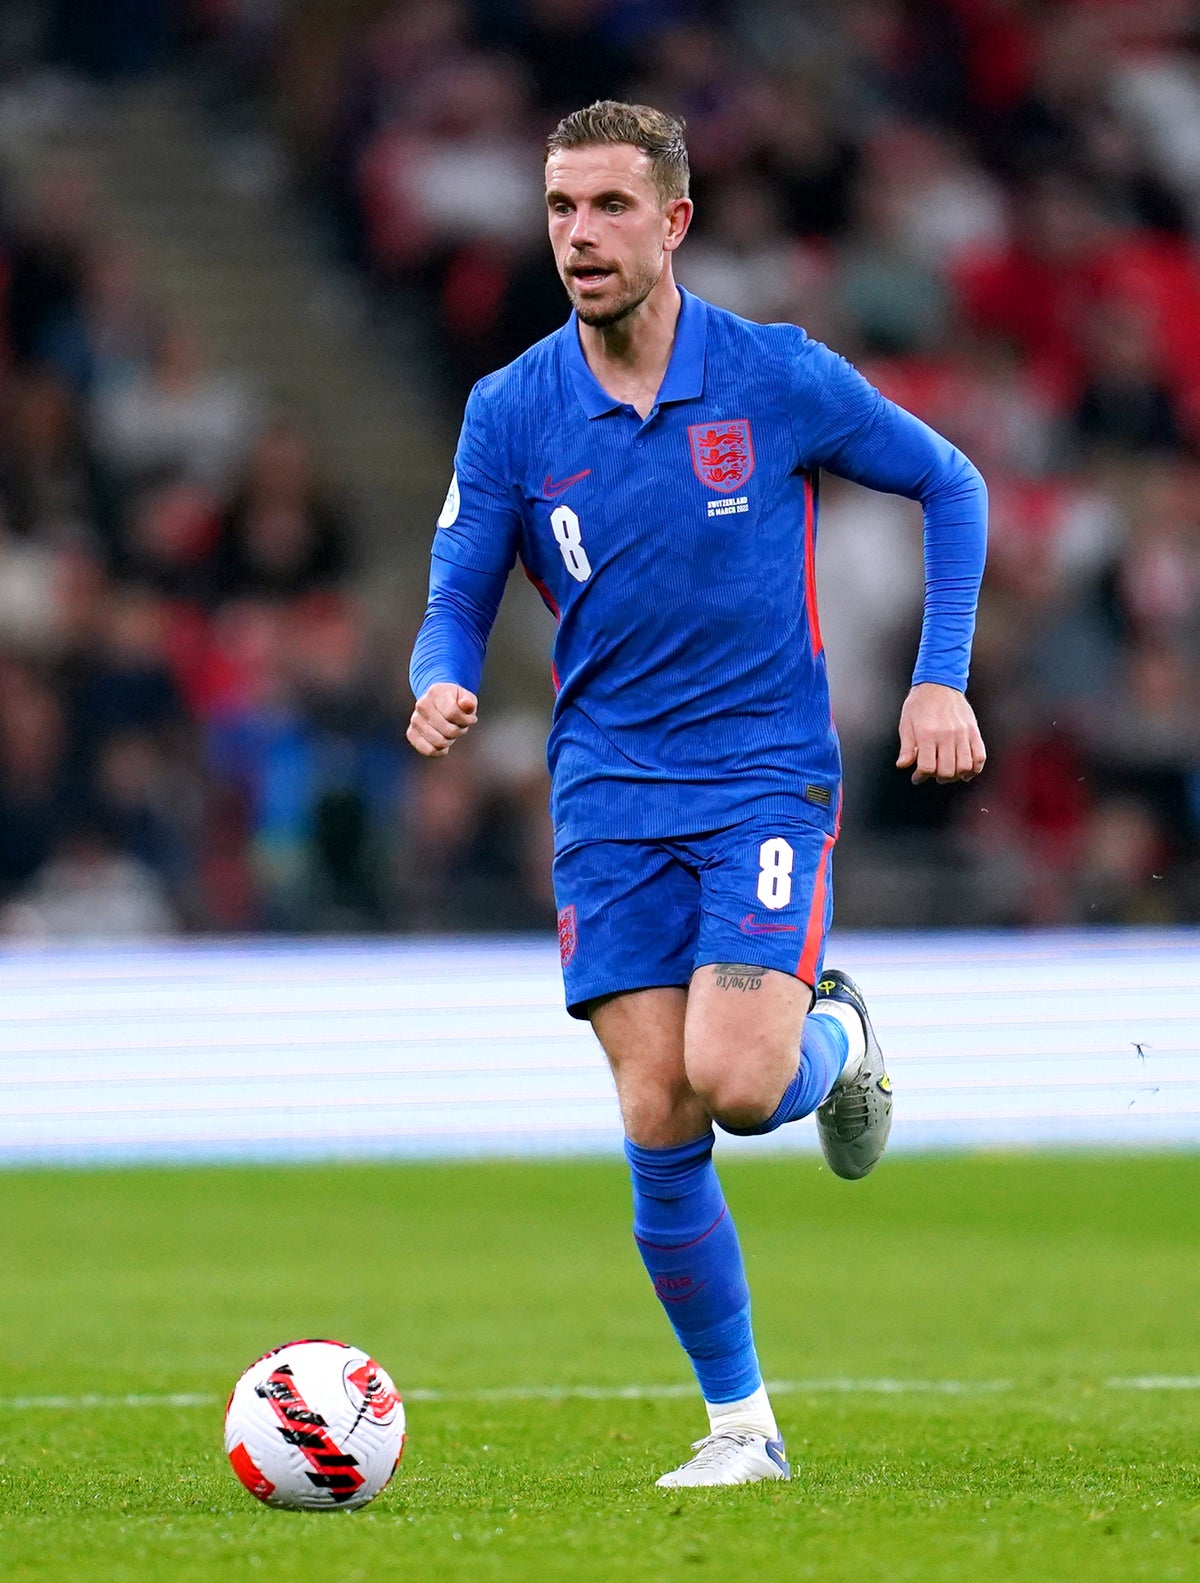 Jordan Henderson to replace Kalvin Phillips in England squad